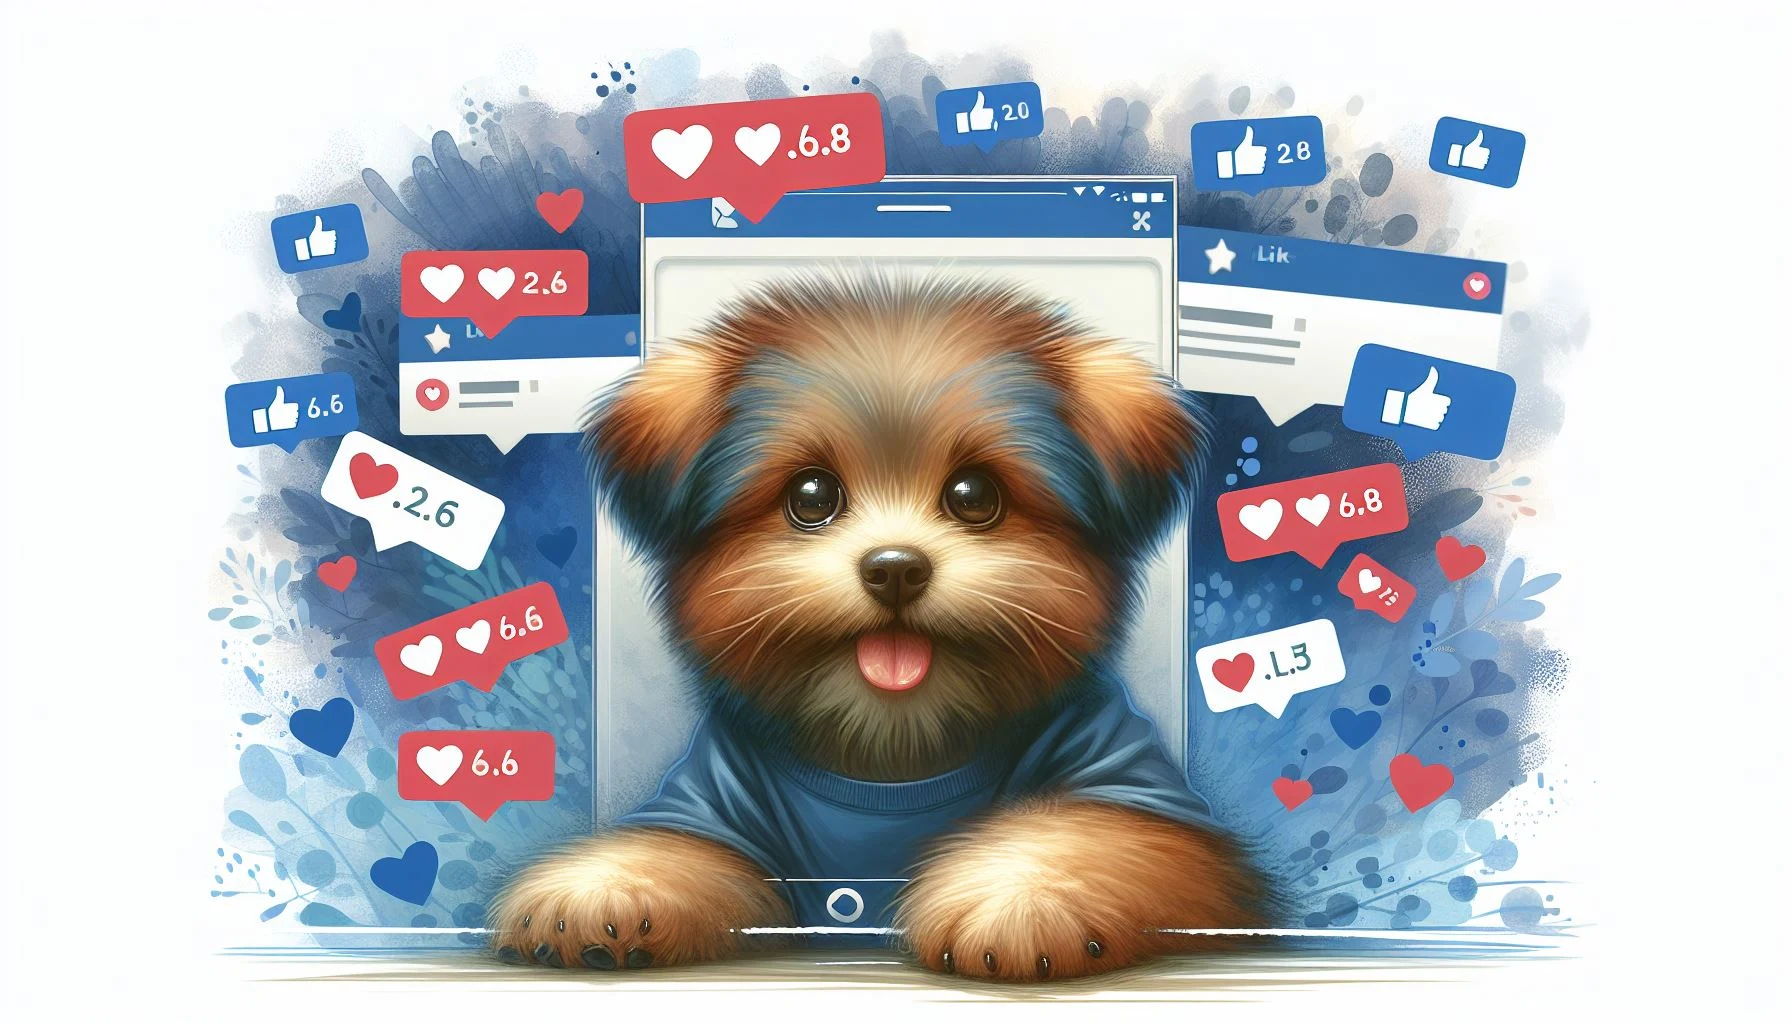 A pet receiving likes and comments on social media.